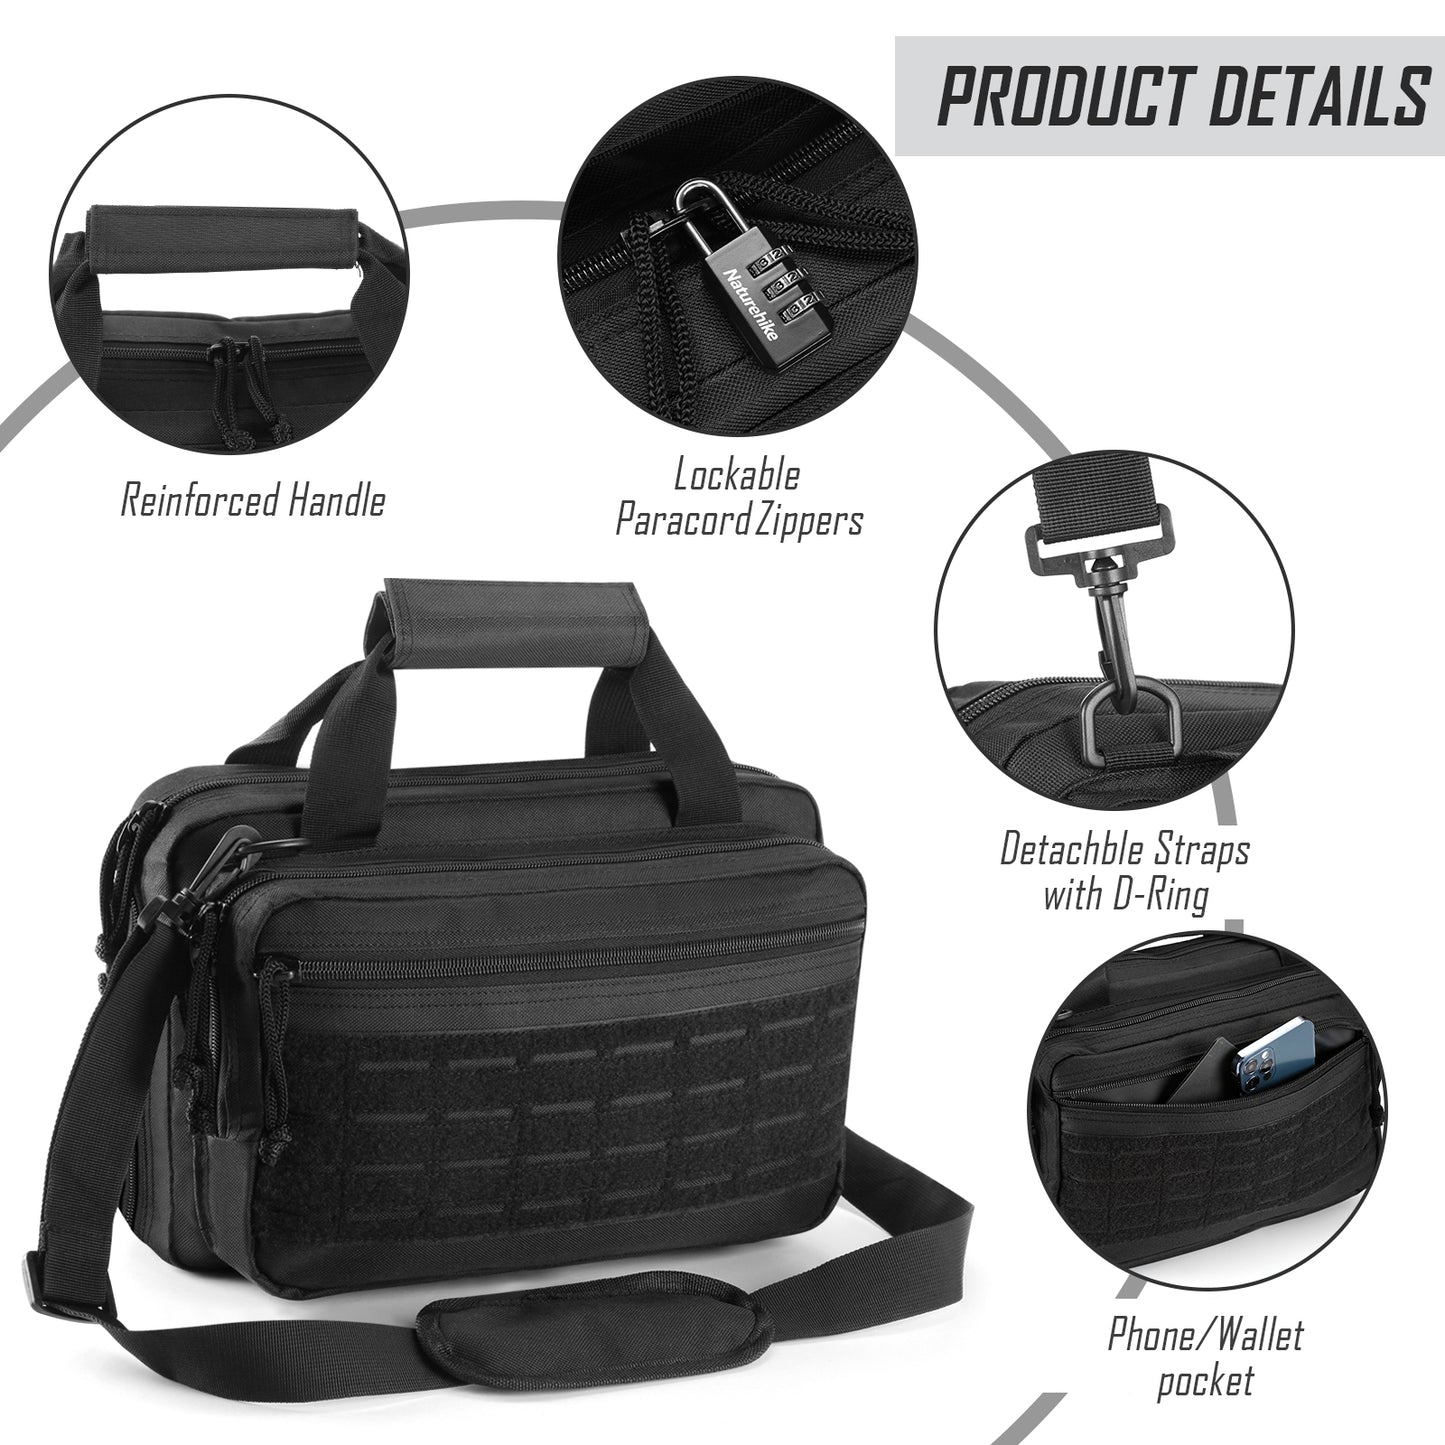 Double-Capacity Pistol Bag with Ammo Compartments, Small Tactical Soft Pistol Carrier for the Shooting Range GBPB001